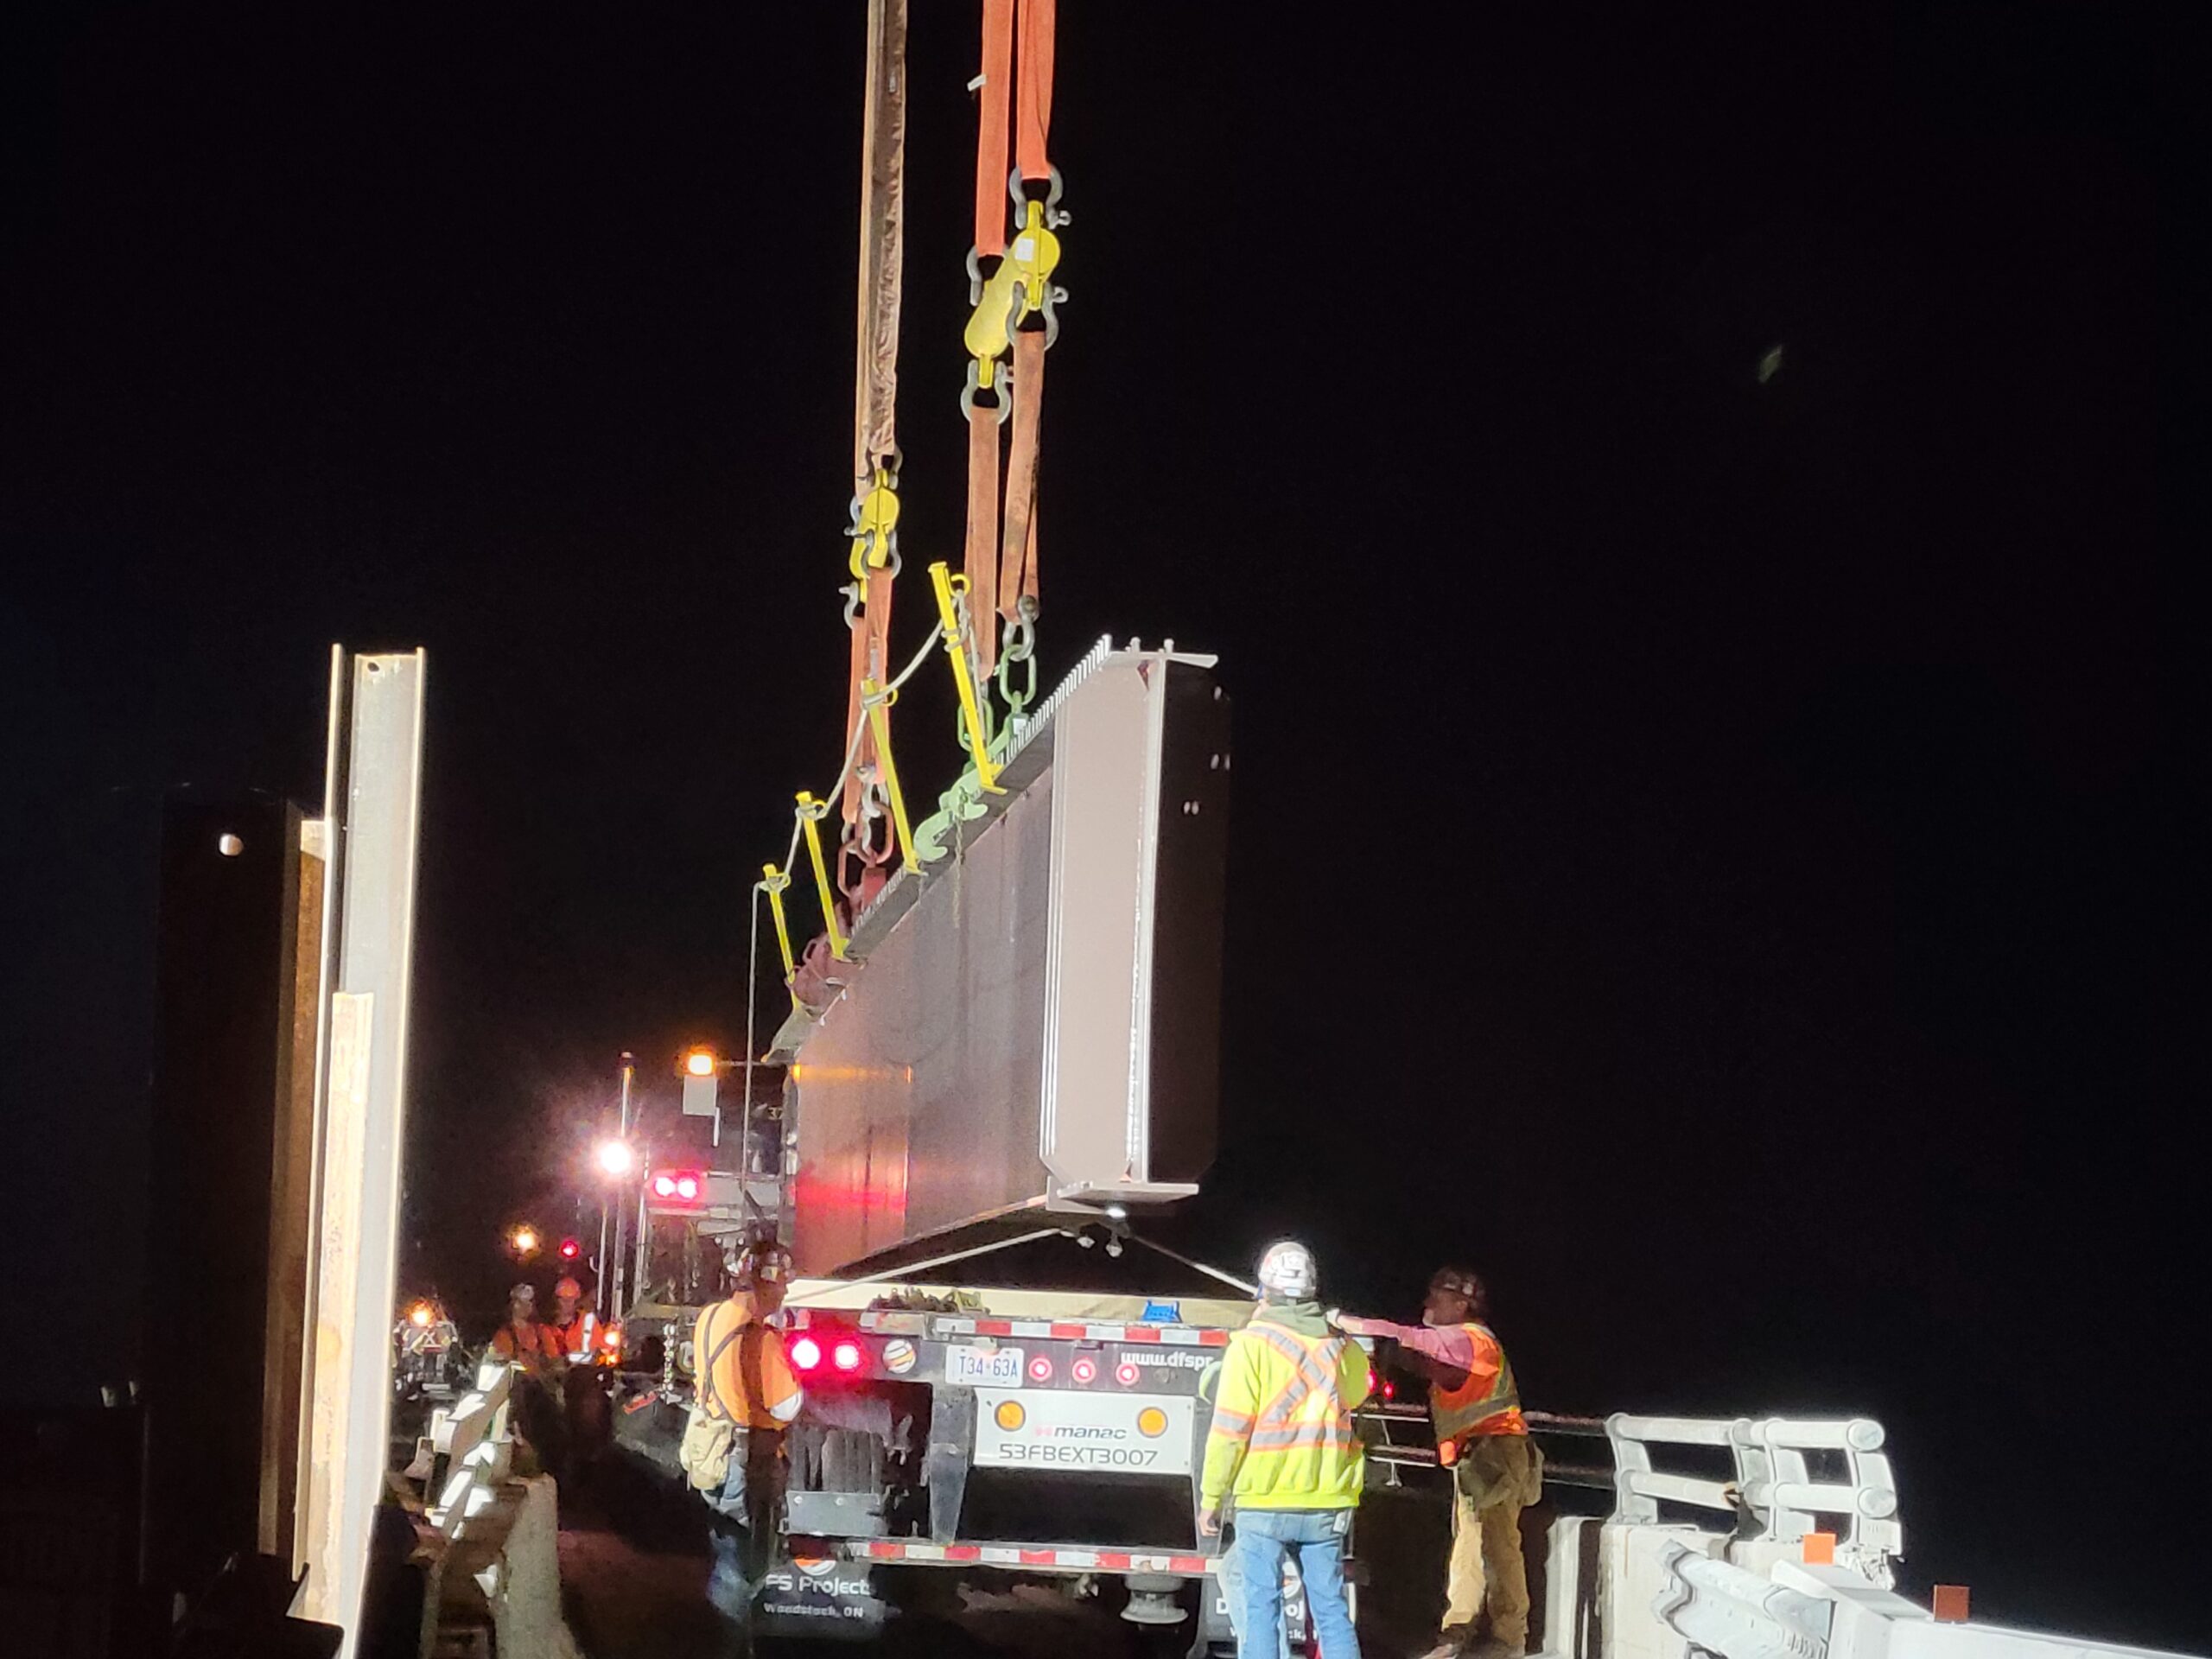 Starting to lift the second girder from the truck